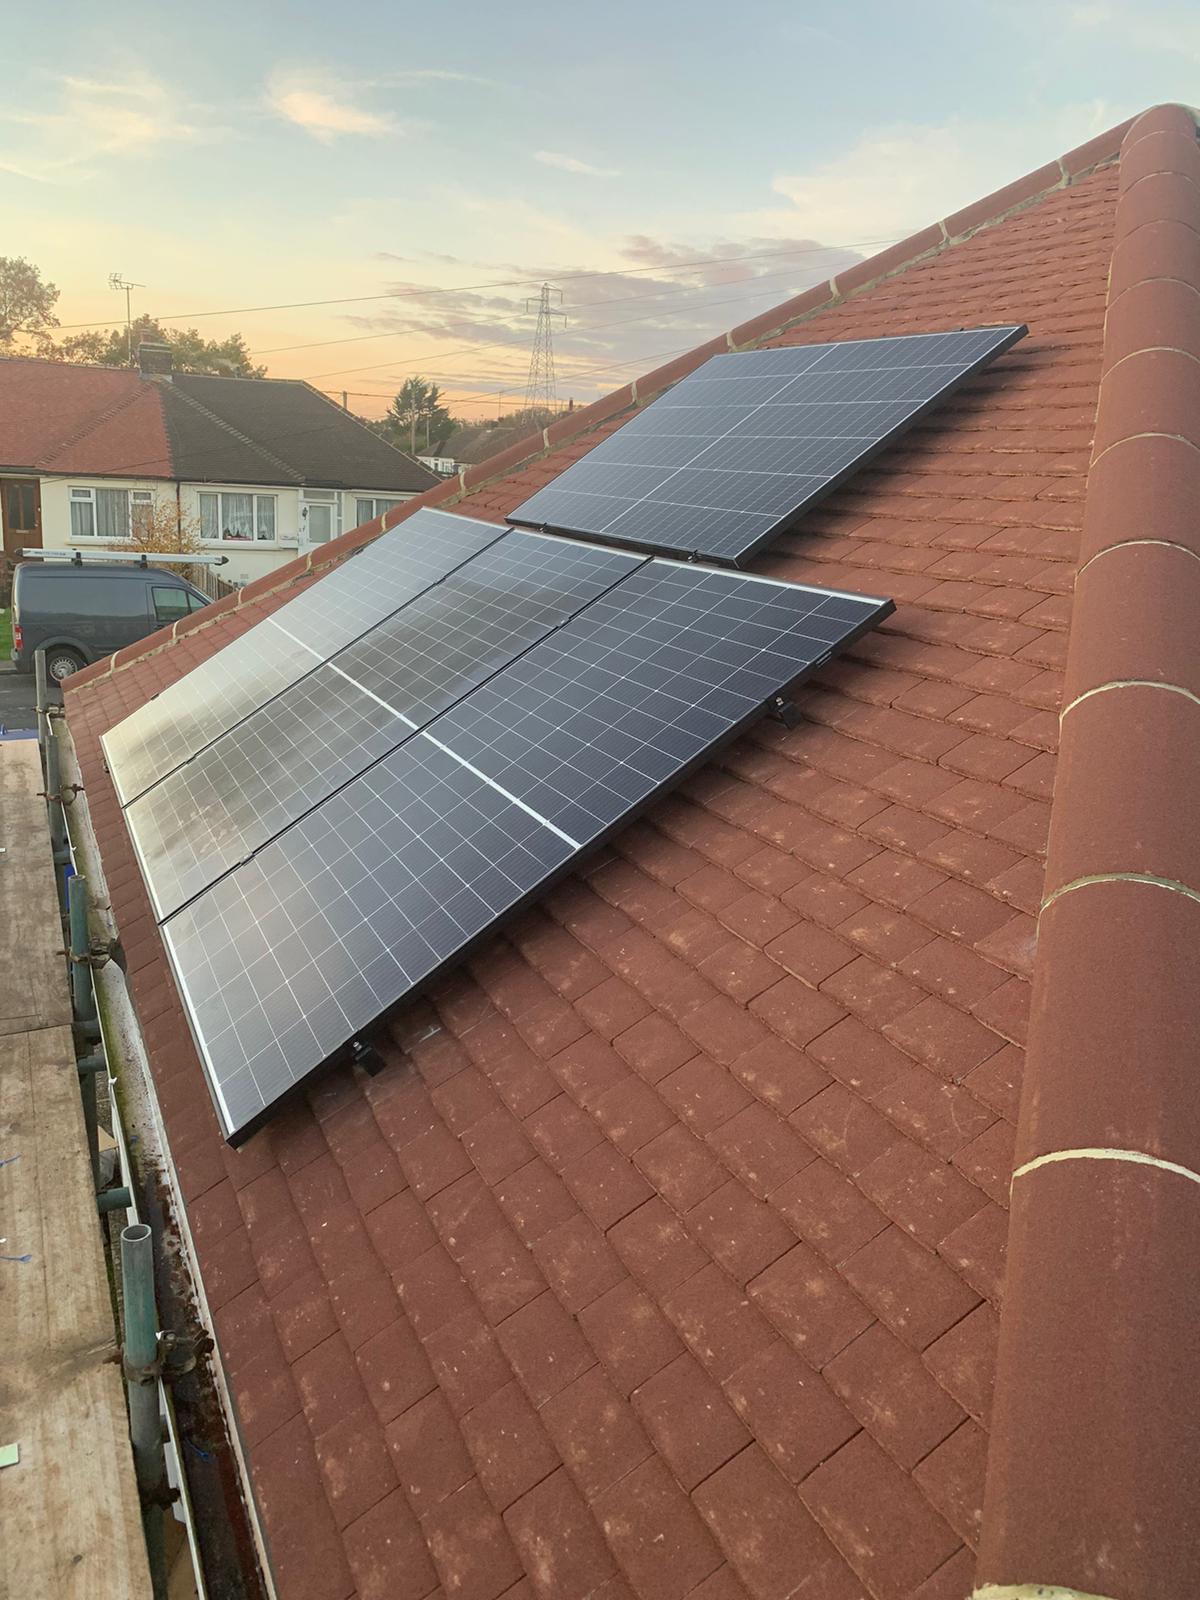 Solar panels fitted on a customer’s roof following it being re-tiled